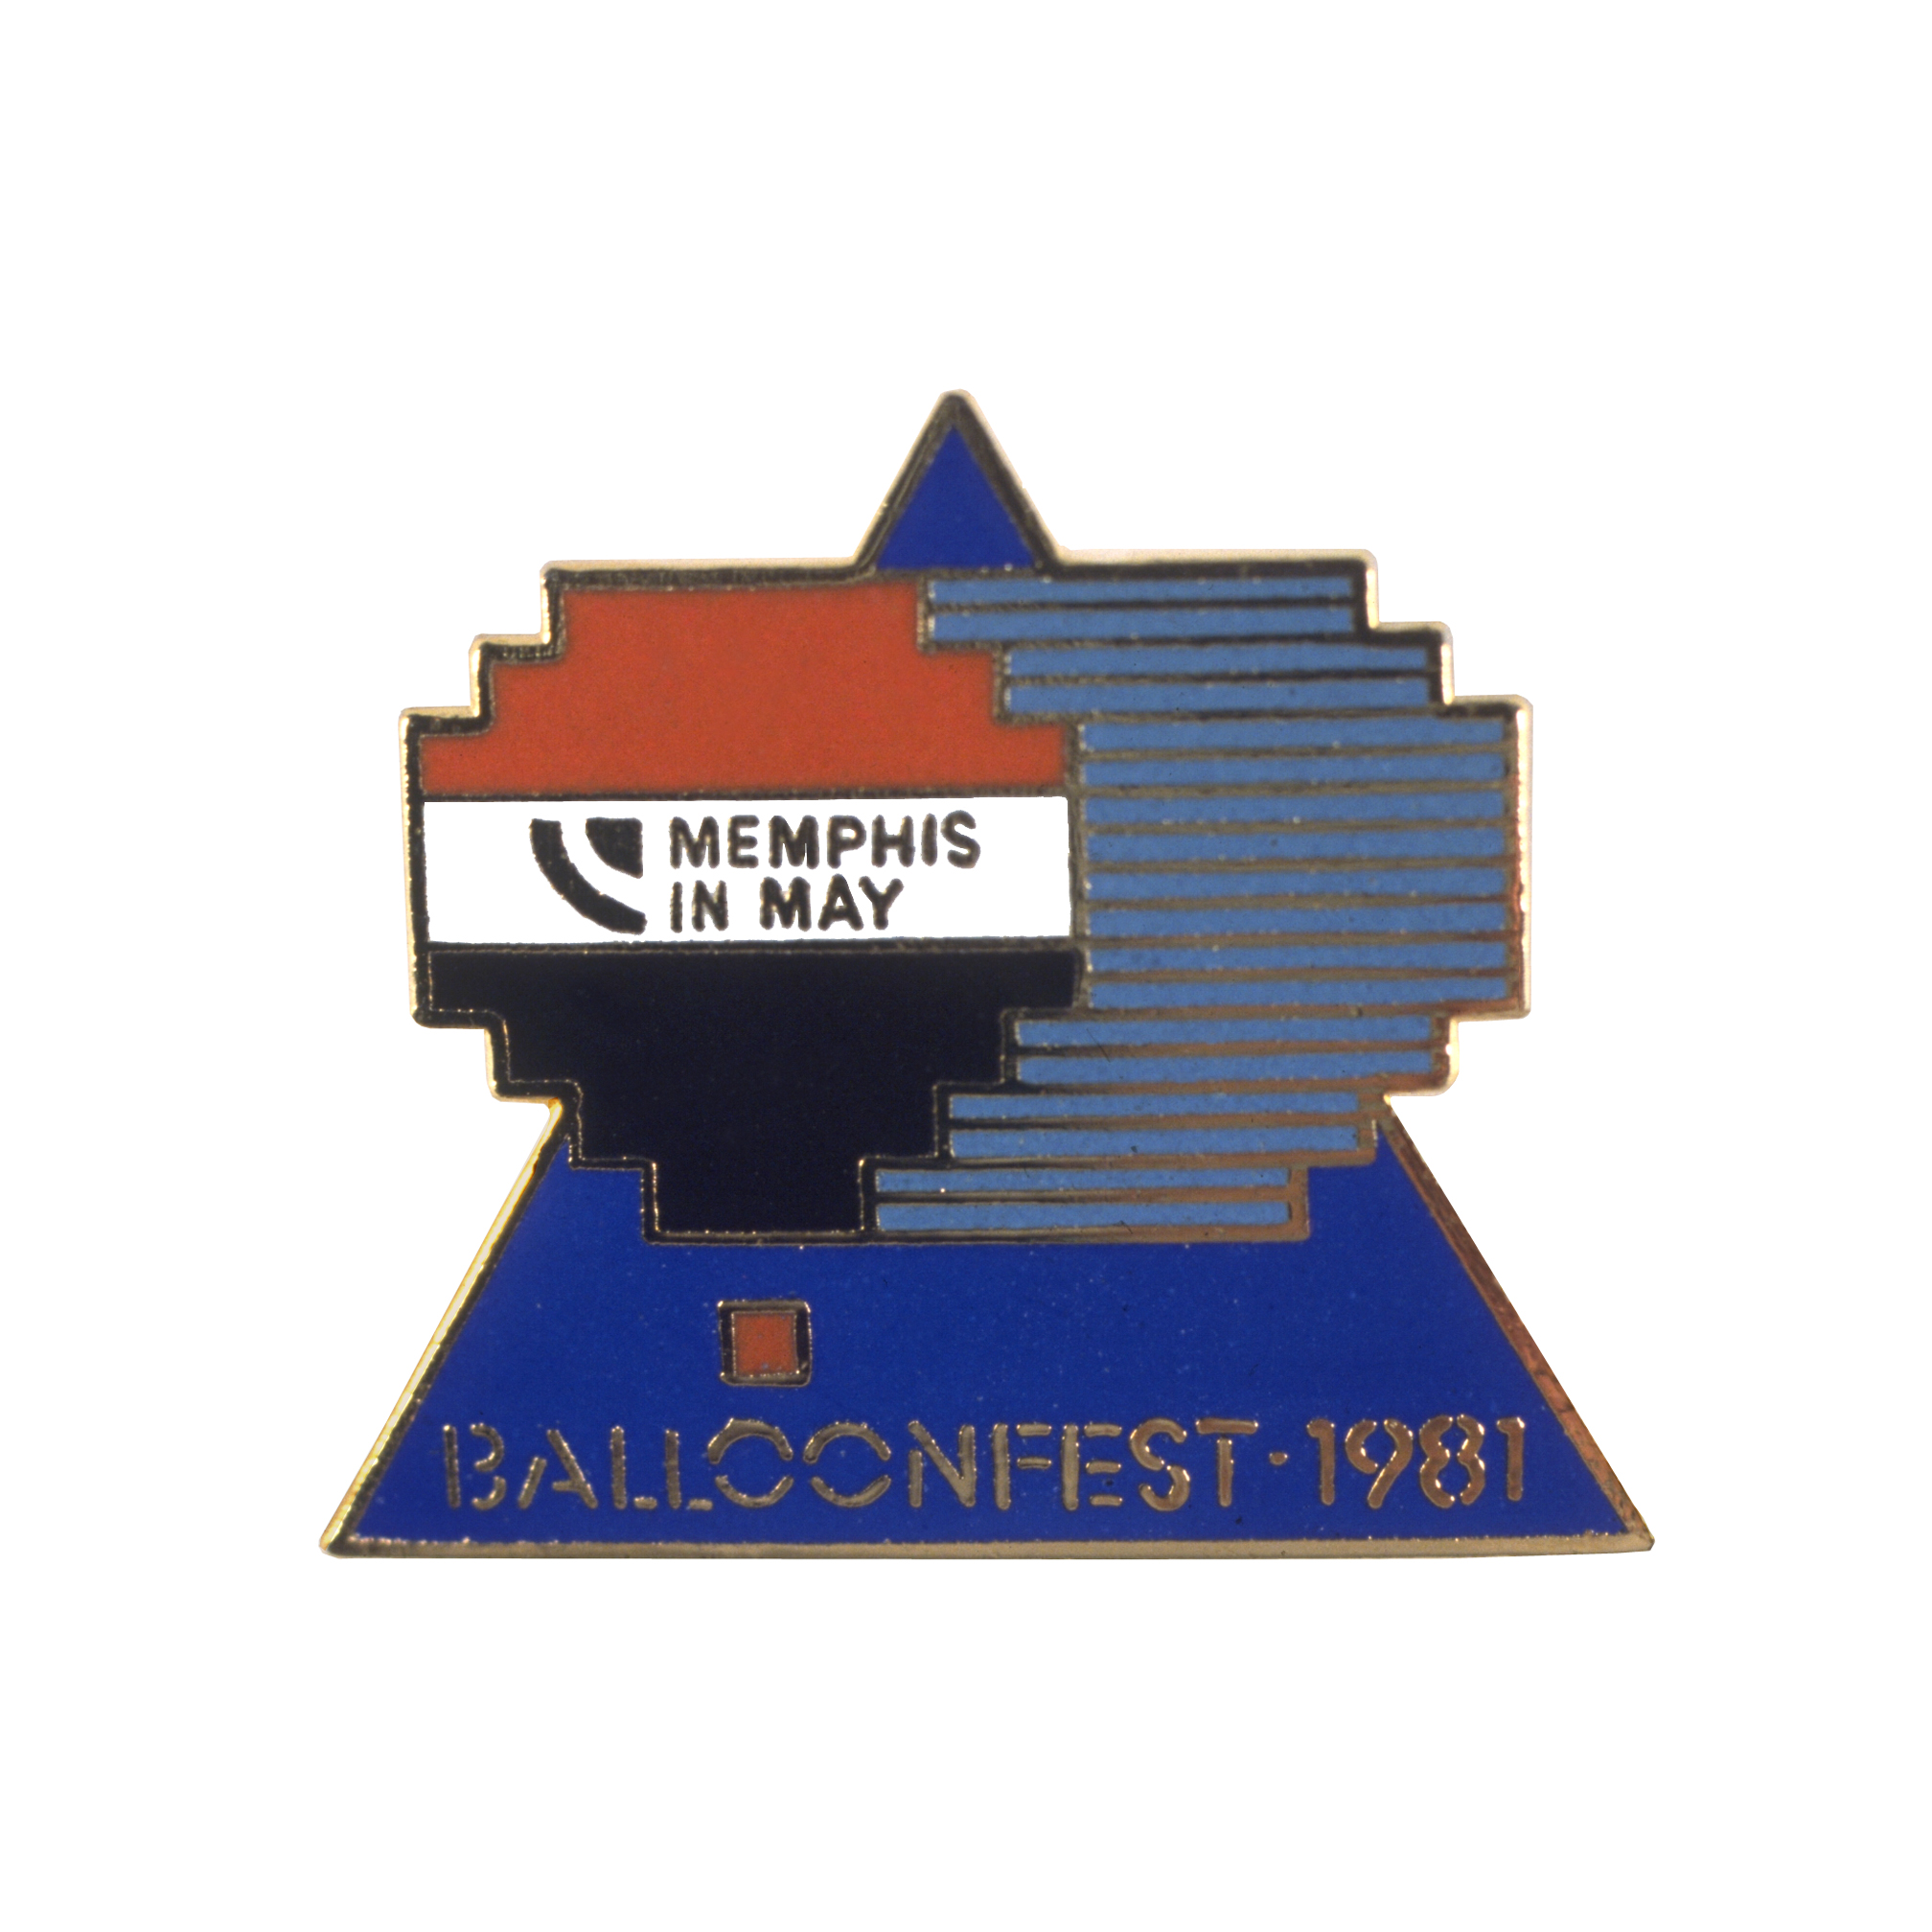  Memphis in May Celebrates Egypt BalloonFest trading pin  Branding creative and design by Chuck Mitchell 